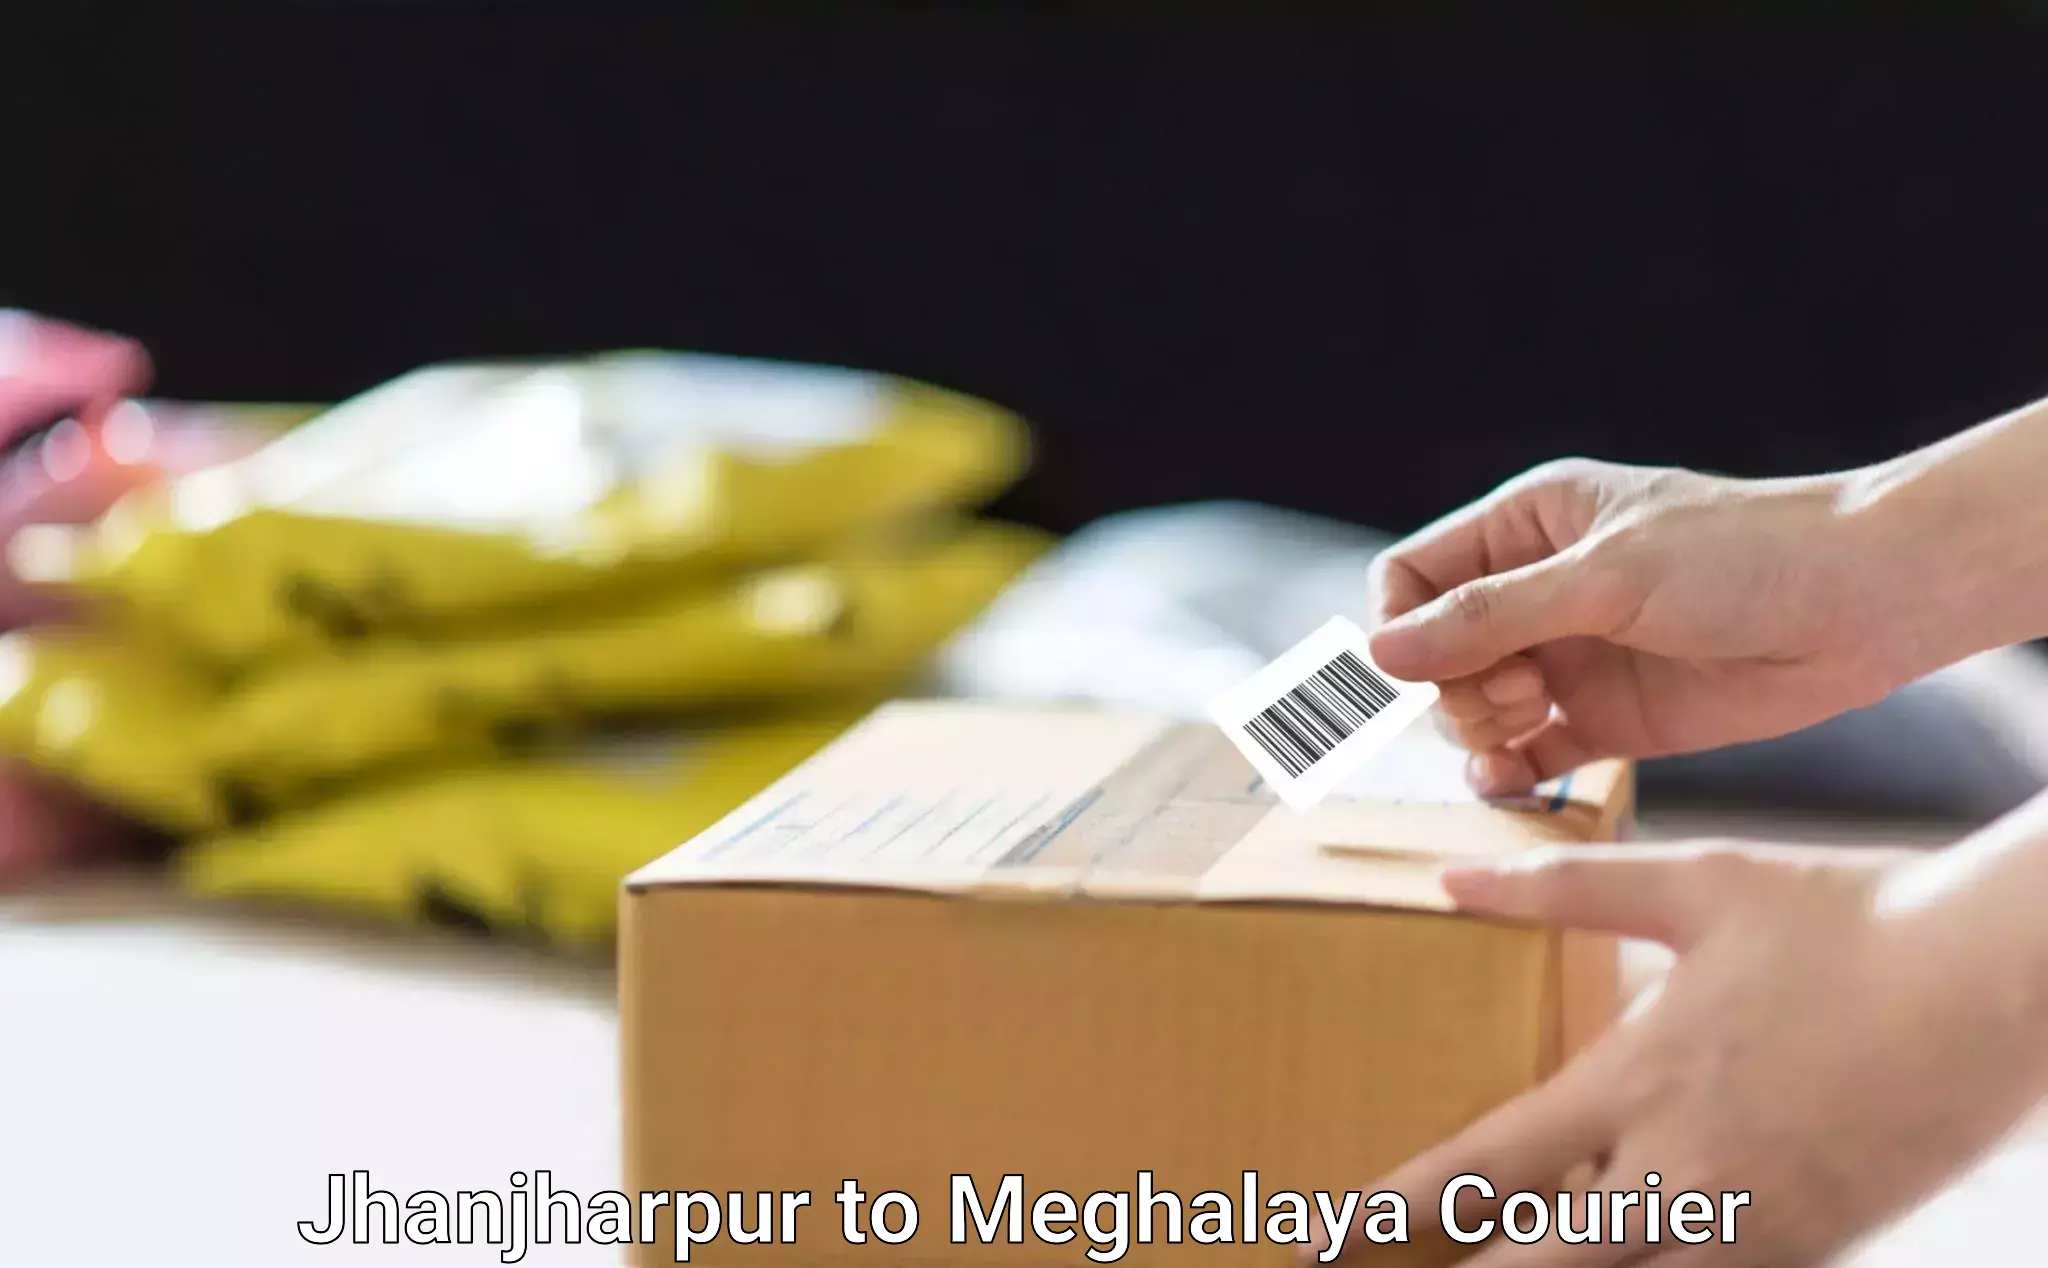 Efficient relocation services in Jhanjharpur to Meghalaya